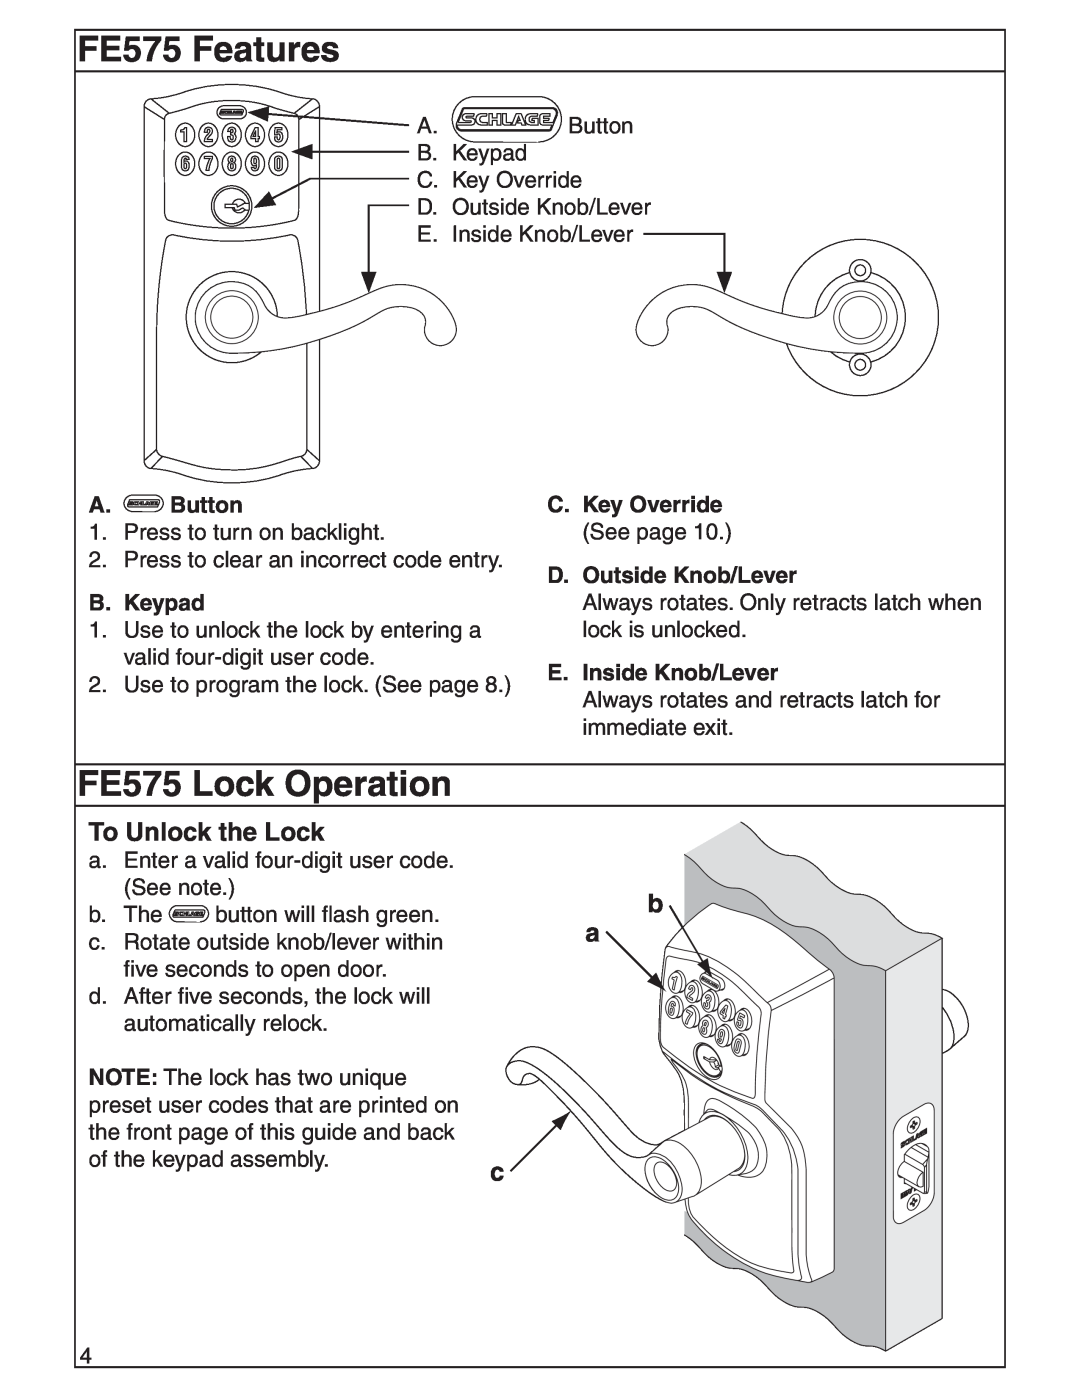 Schlage FE595 FE575 Features, FE575 Lock Operation, To Unlock the Lock, C.Key Override See page D.Outside Knob/Lever 